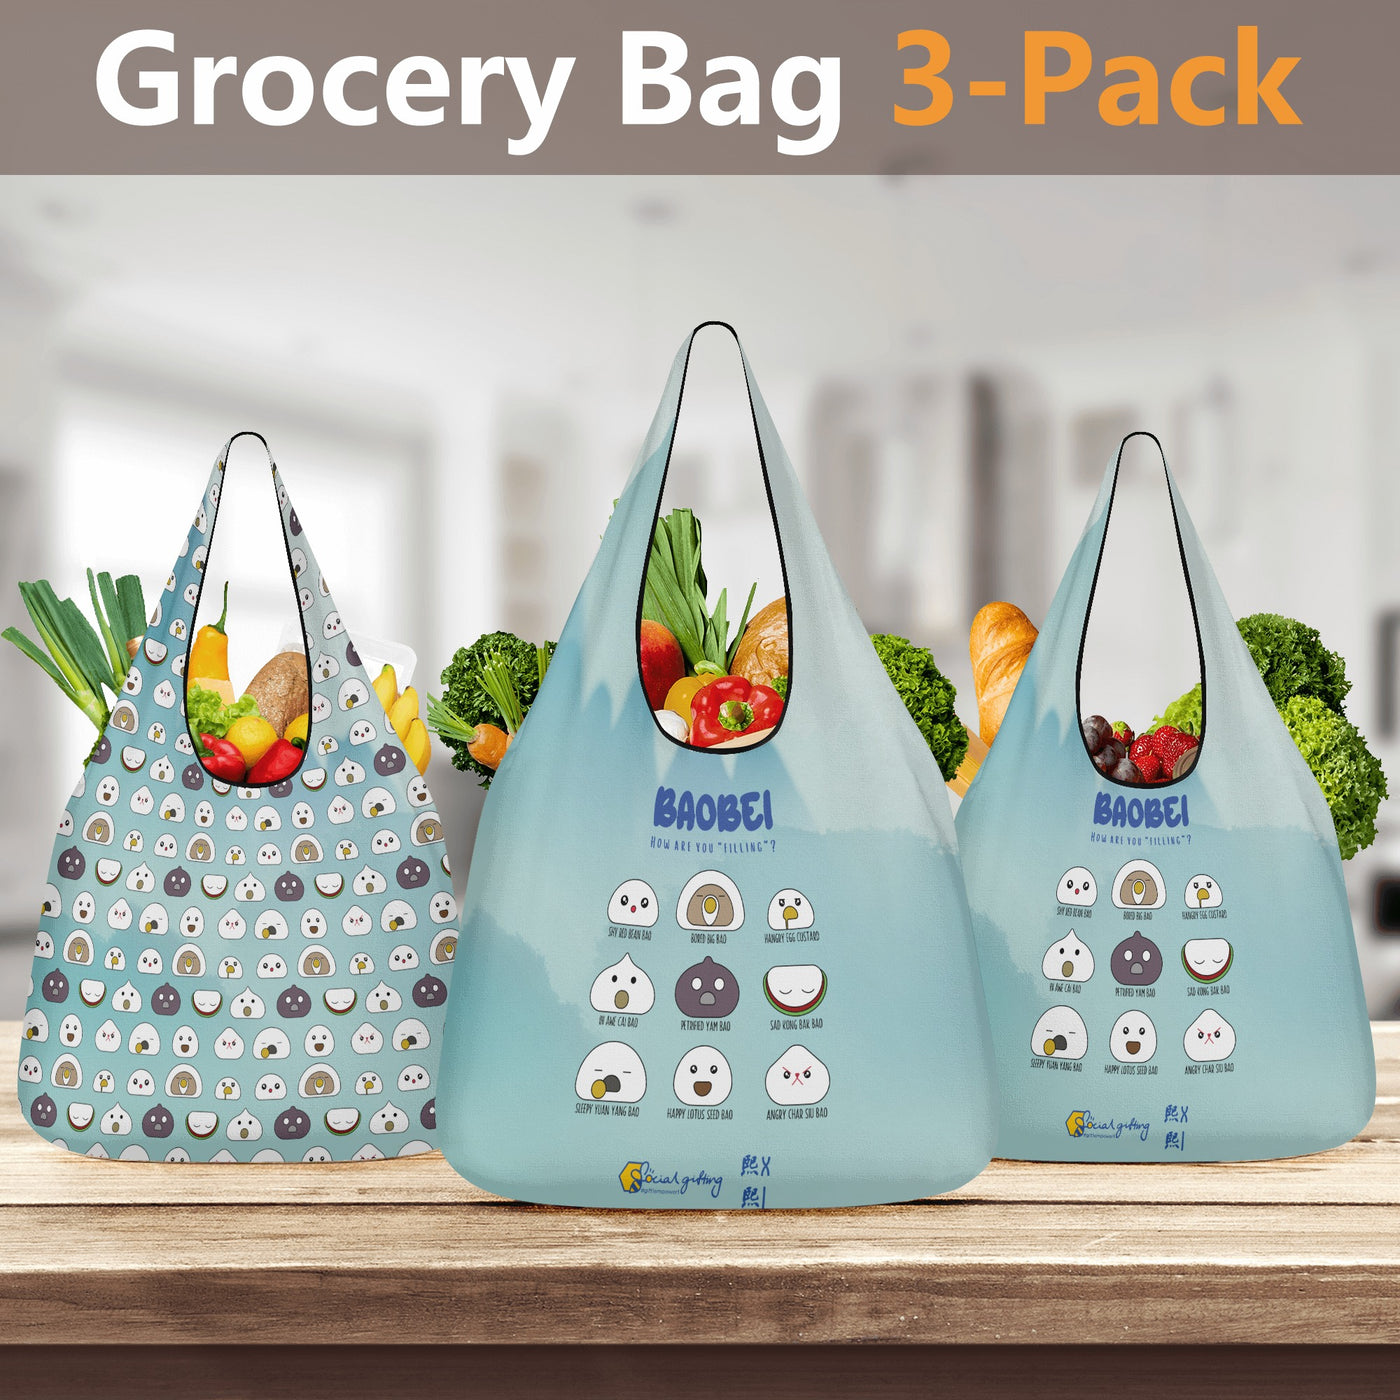 3 Pack of Grocery Bags (45 days pre-order)